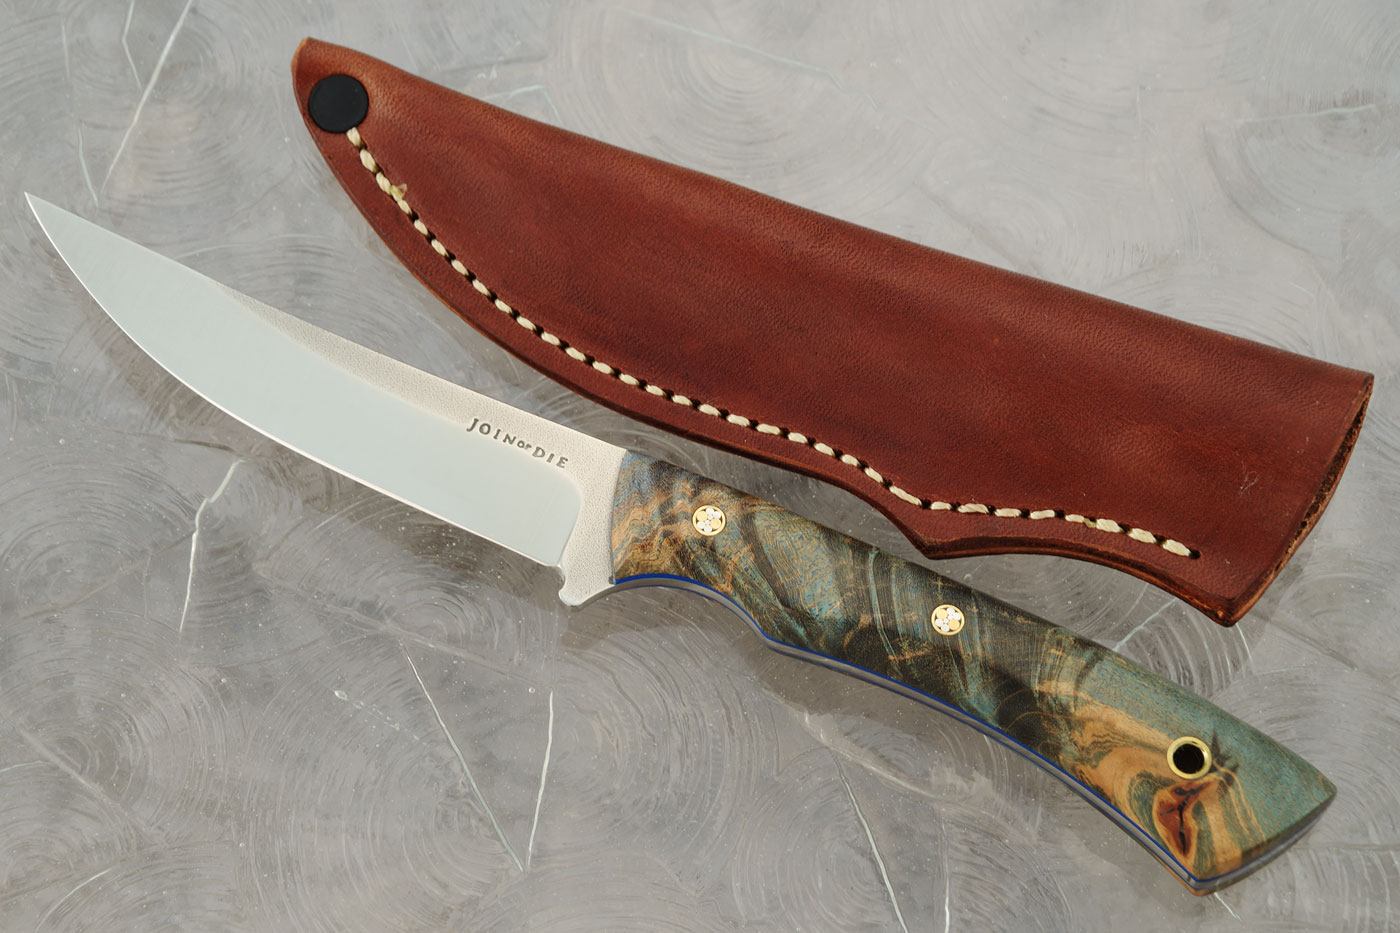 Bird & Trout with Maple Burl - Nitro-V Stainless